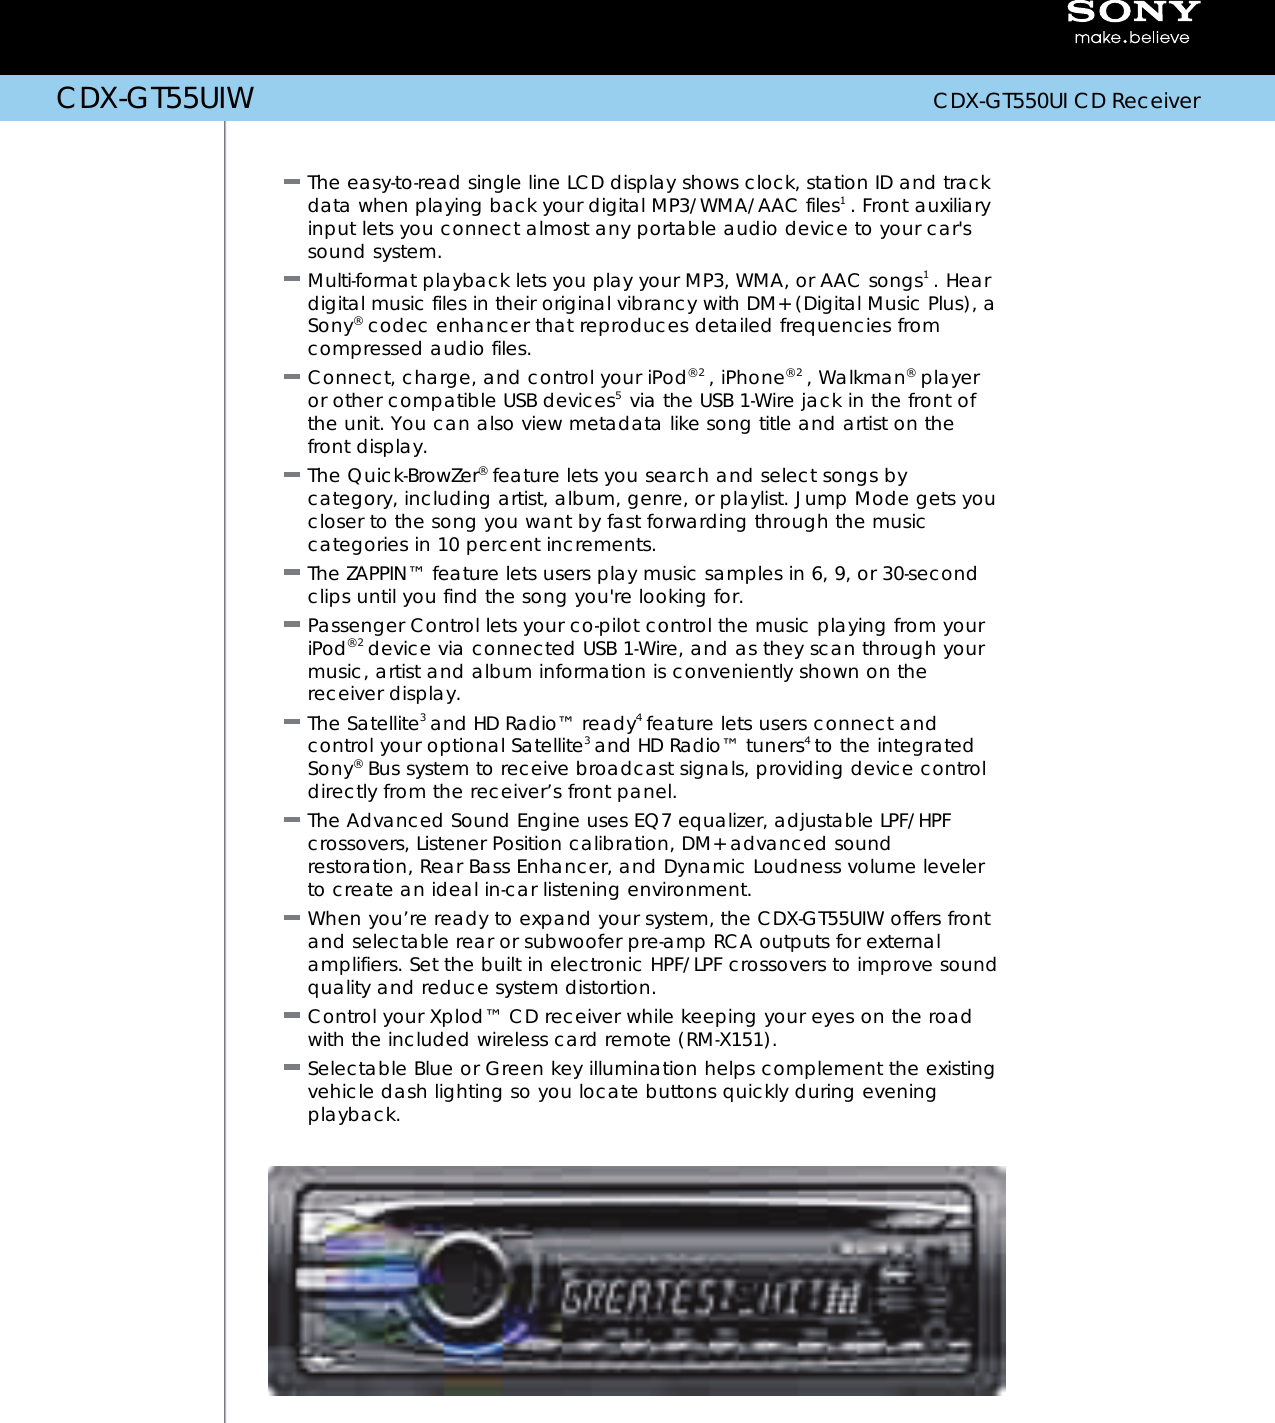 Sony Bluetooth Car Stereo Wiring Diagram from usermanual.wiki